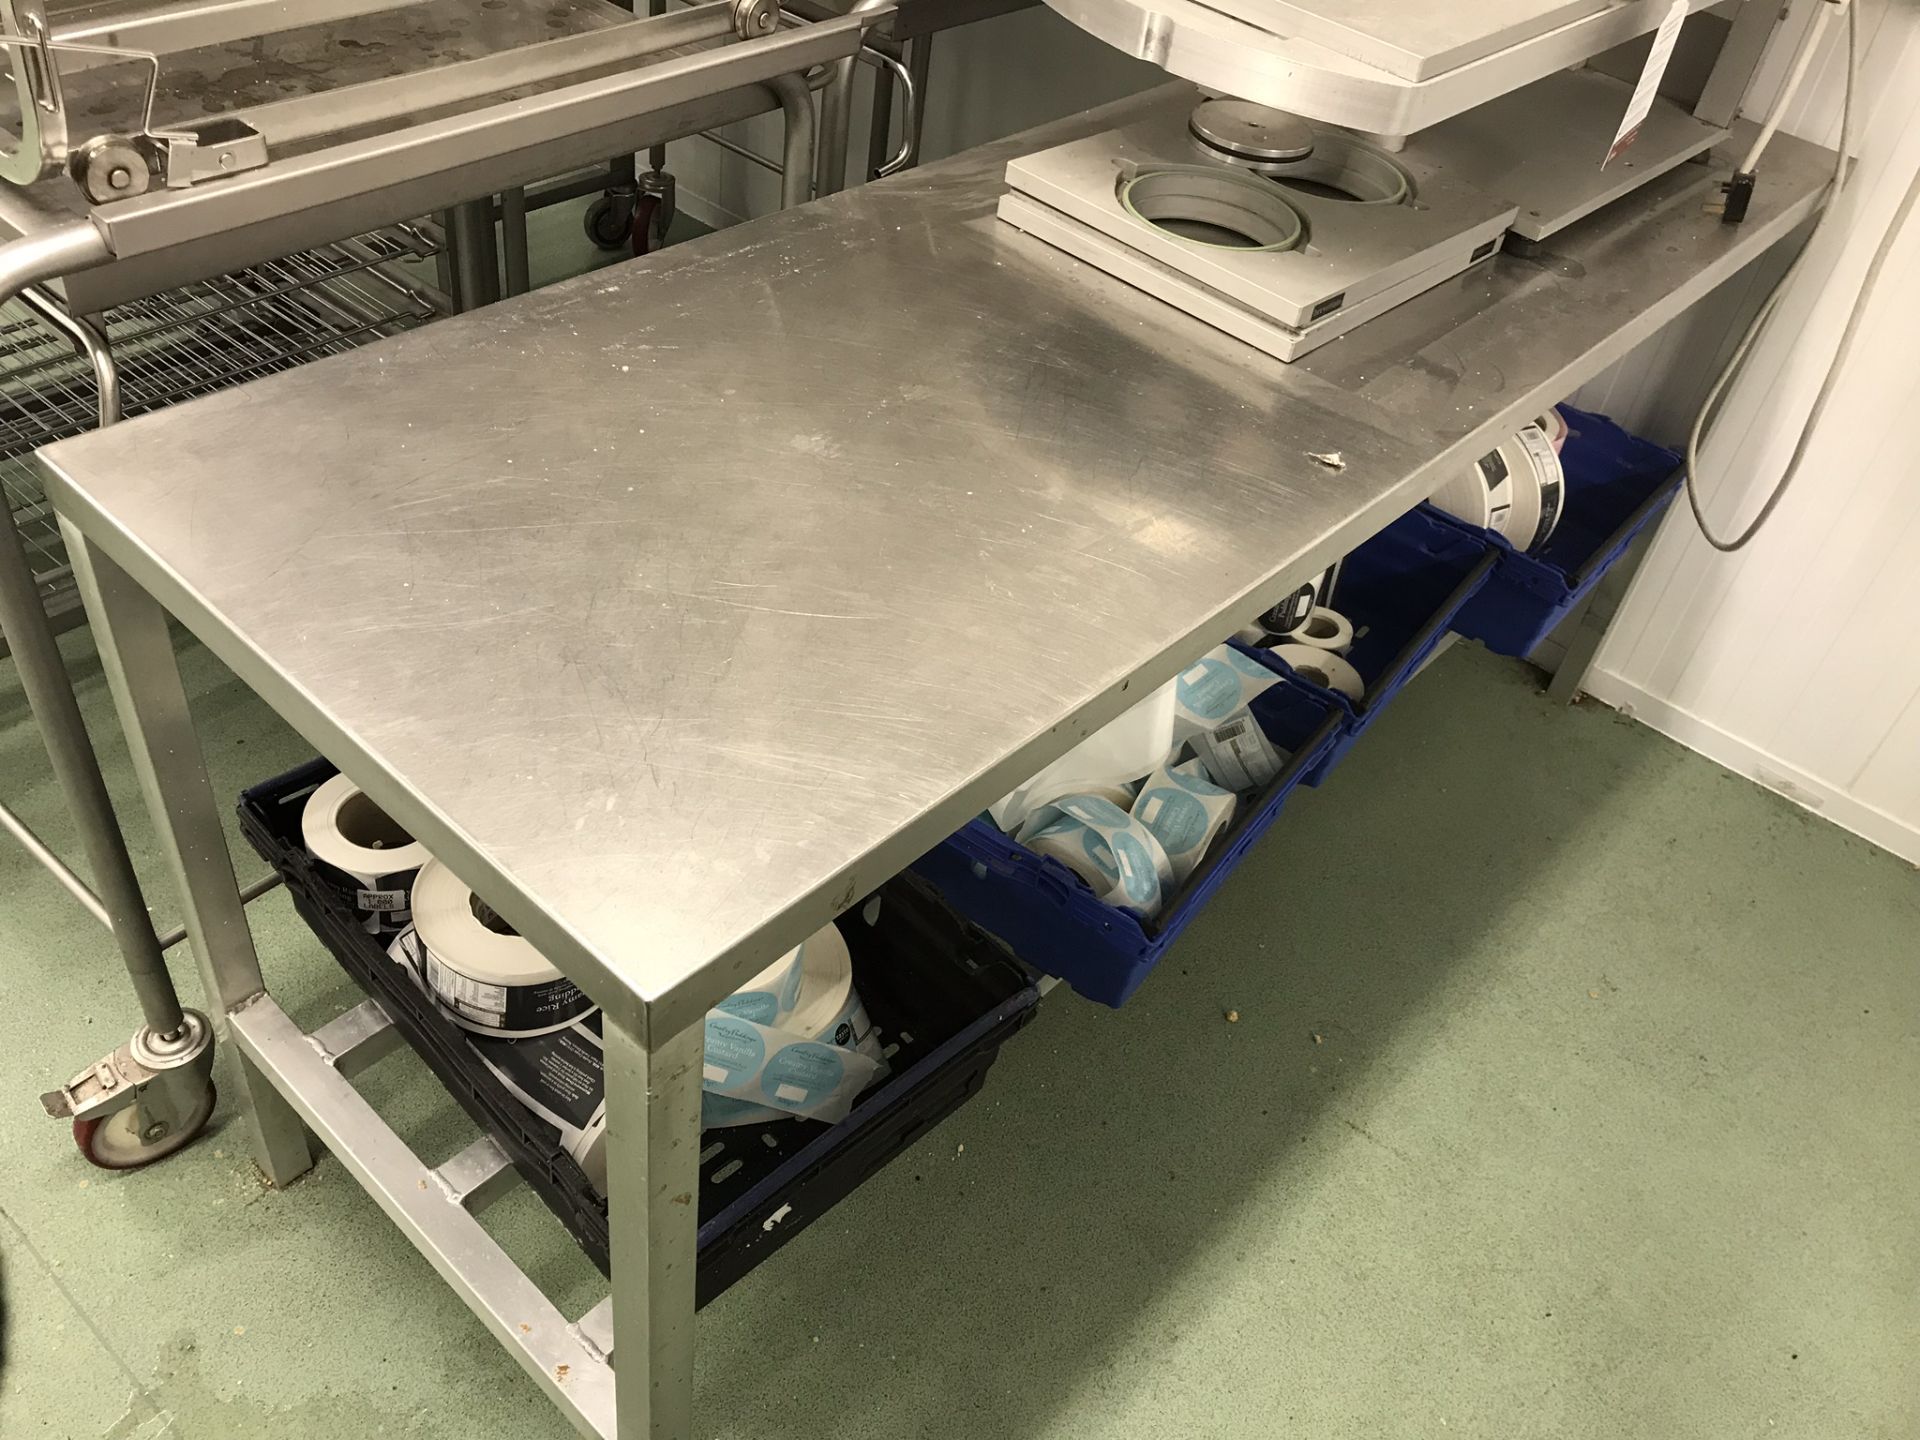 Stainless Steel Preparation Table - 1820mm Length | CONTENTS NOT INCLUDED